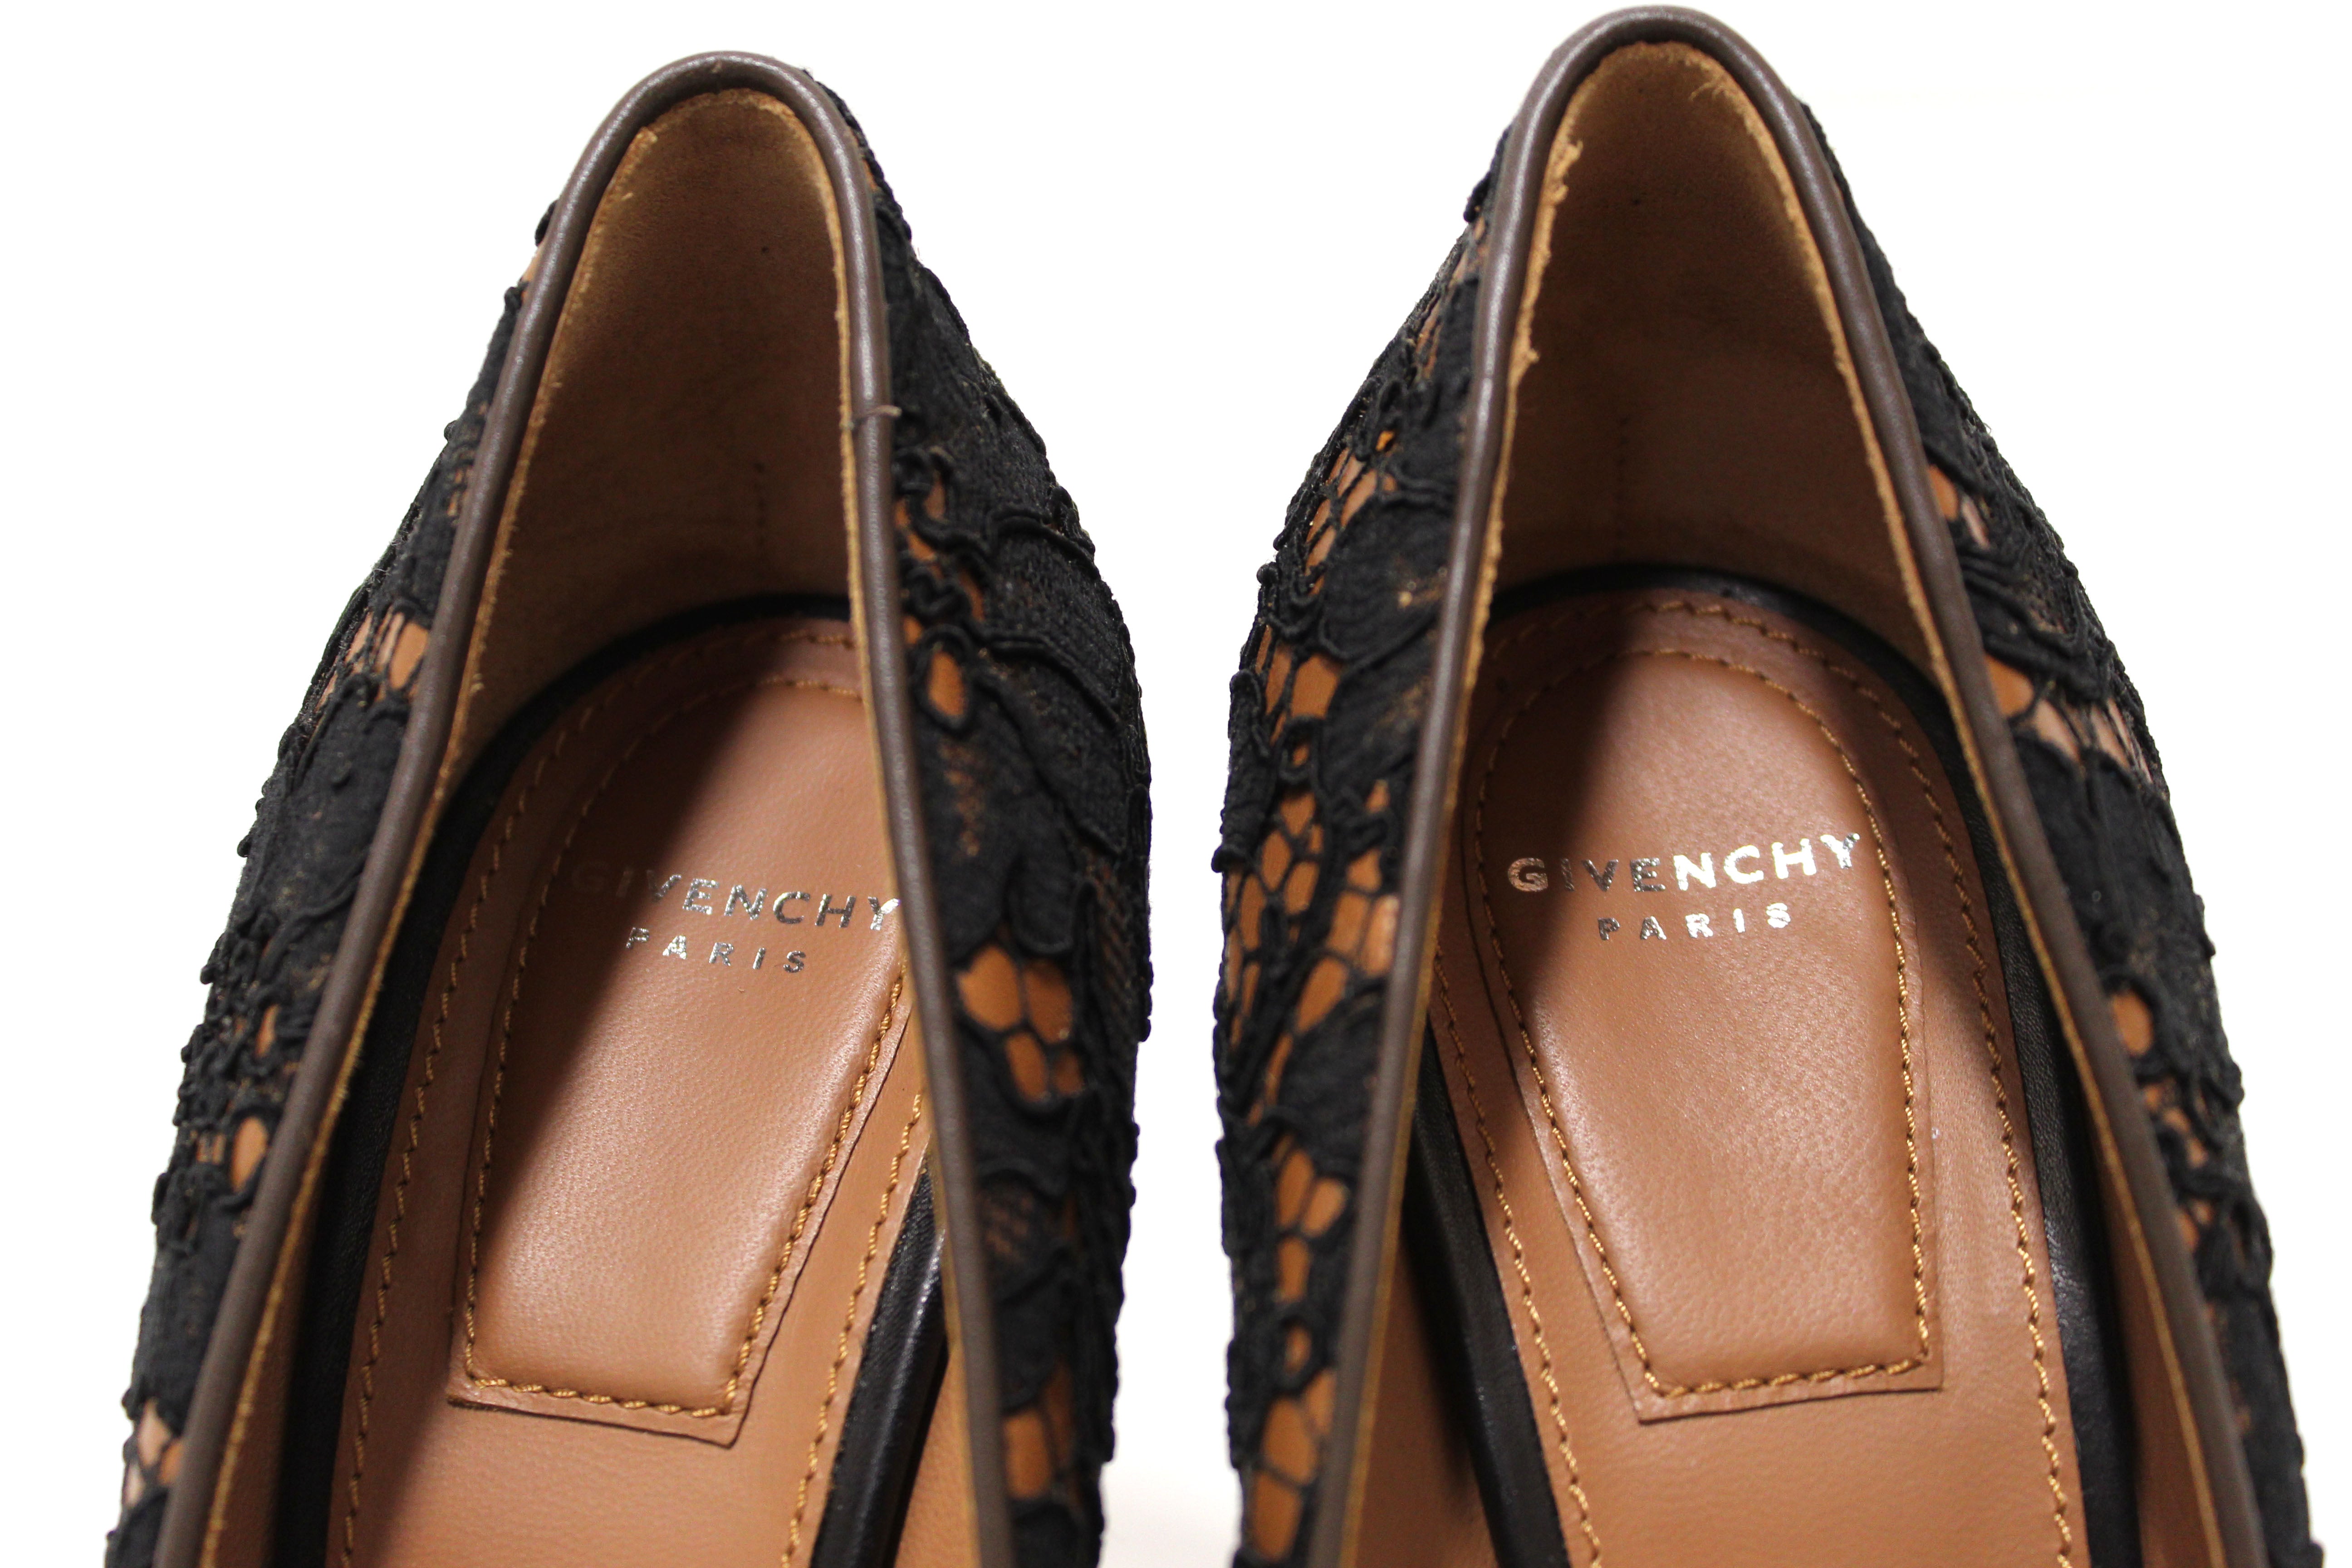 NEW Authentic Givenchy Black Floral Lace Cover Brown Leather Pamela Pump Size 37.5